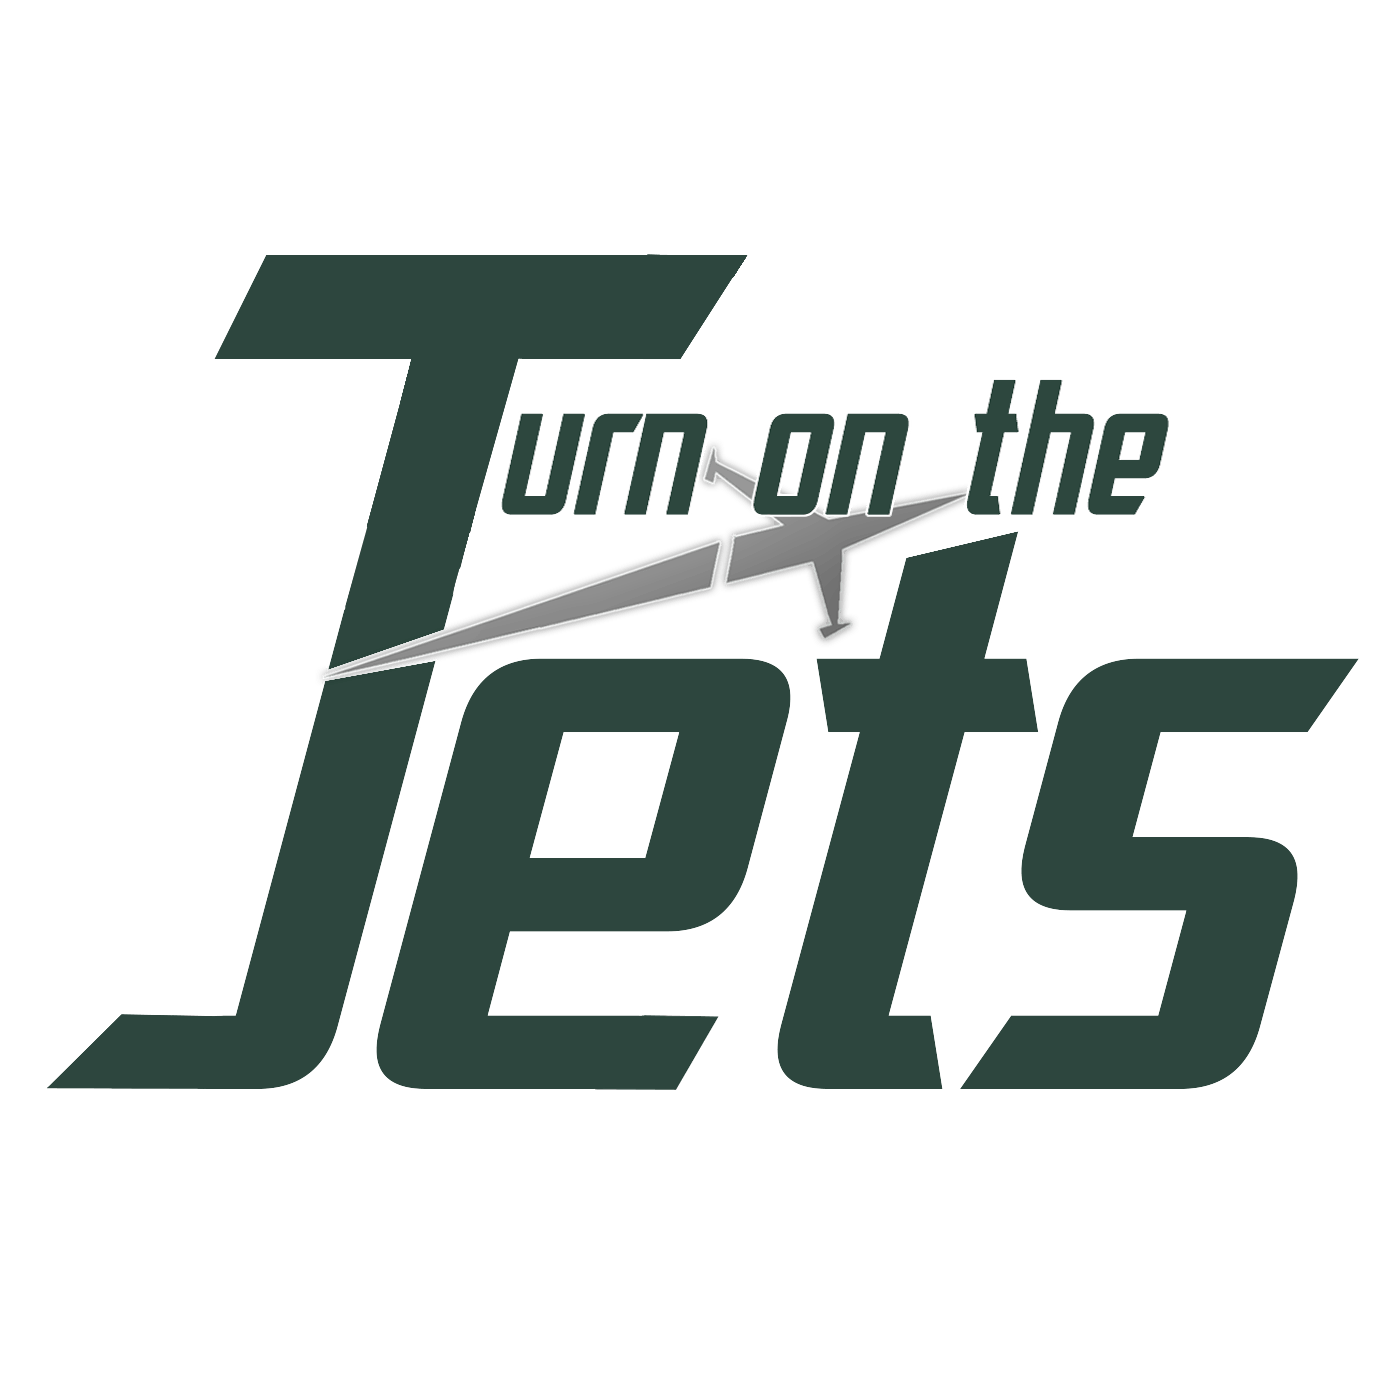 Jets State Of The Union f/ Connor Hughes (Ep 138)